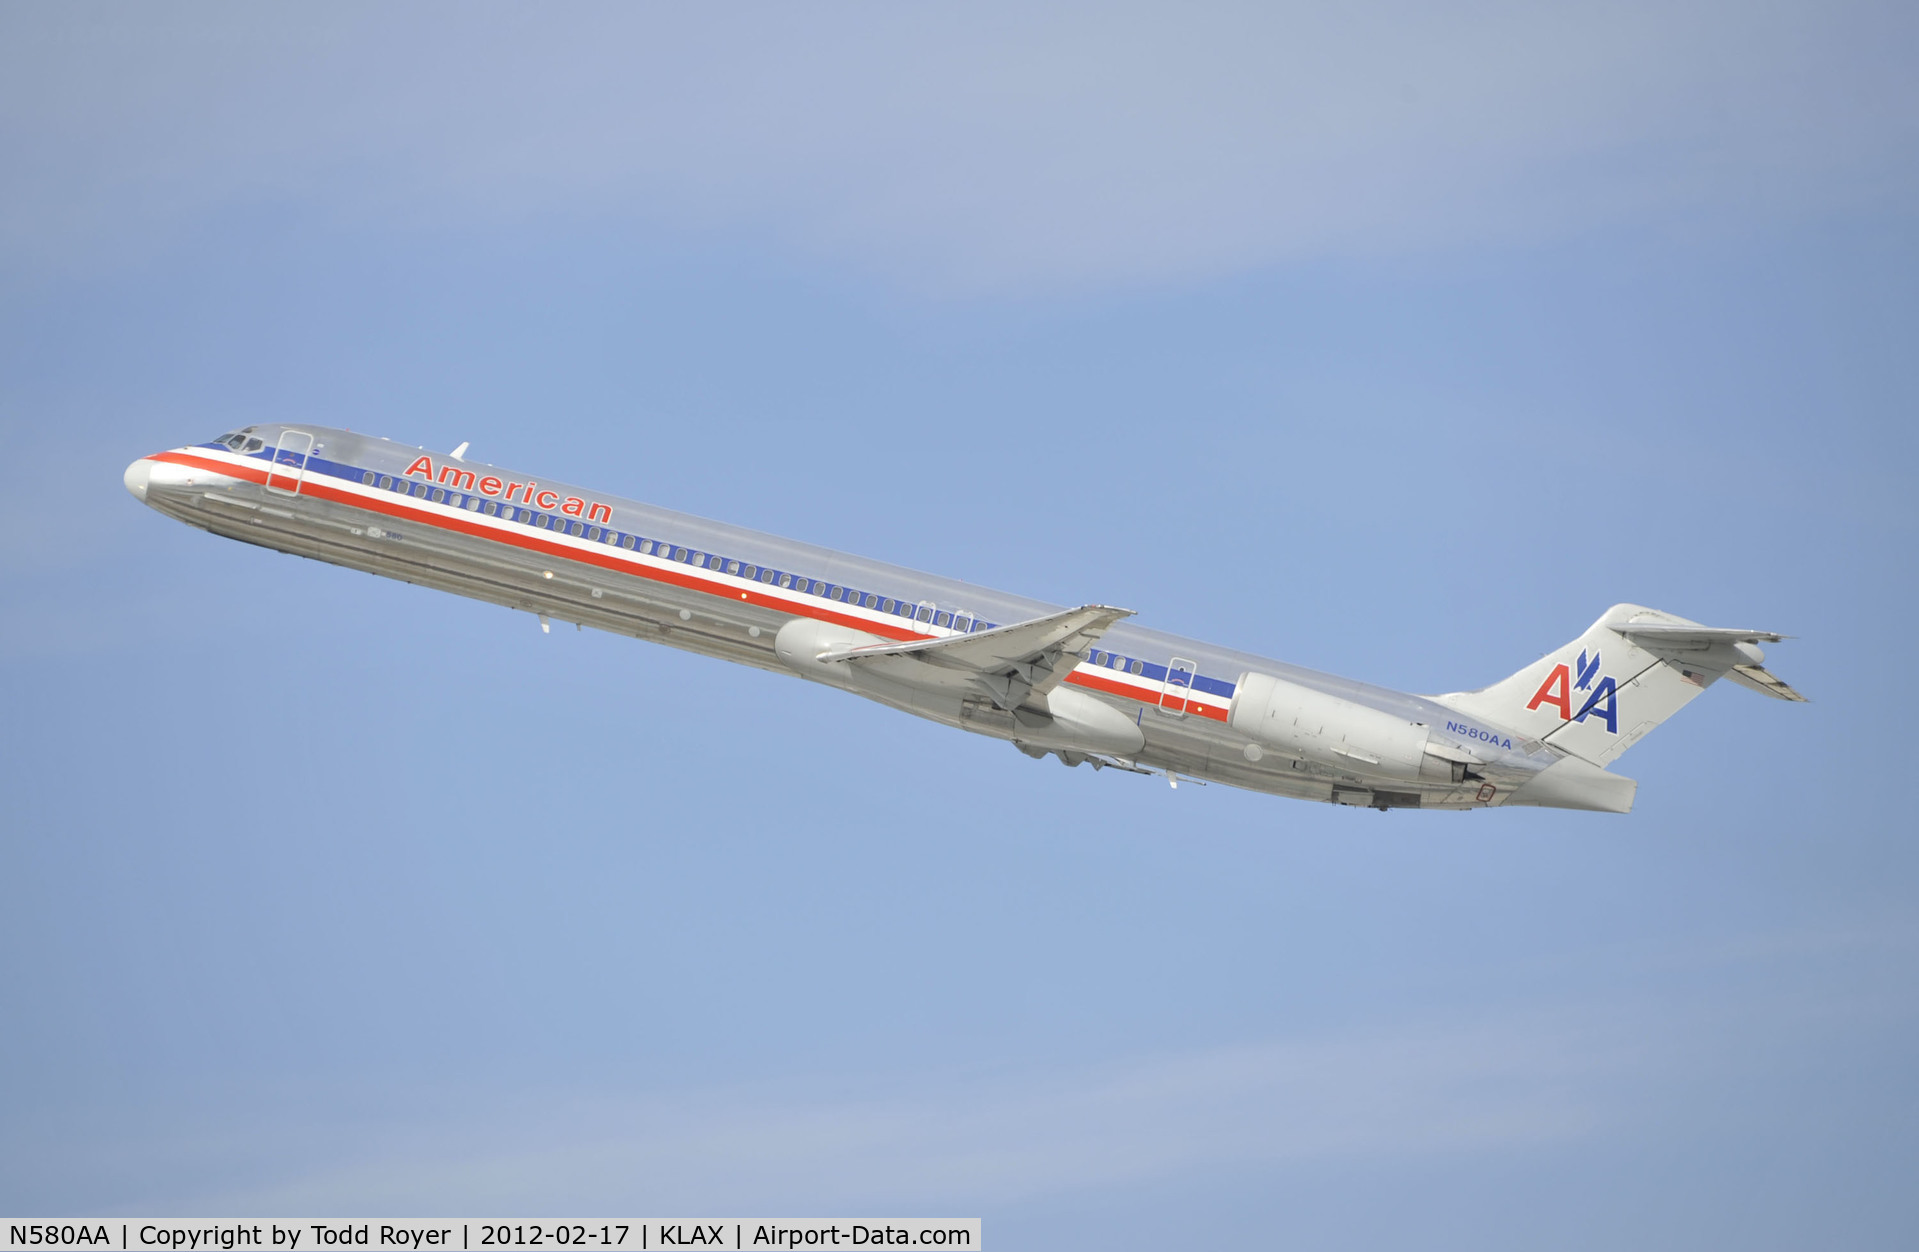 N580AA, 1991 McDonnell Douglas MD-82 (DC-9-82) C/N 53157, departing LAX on 25R